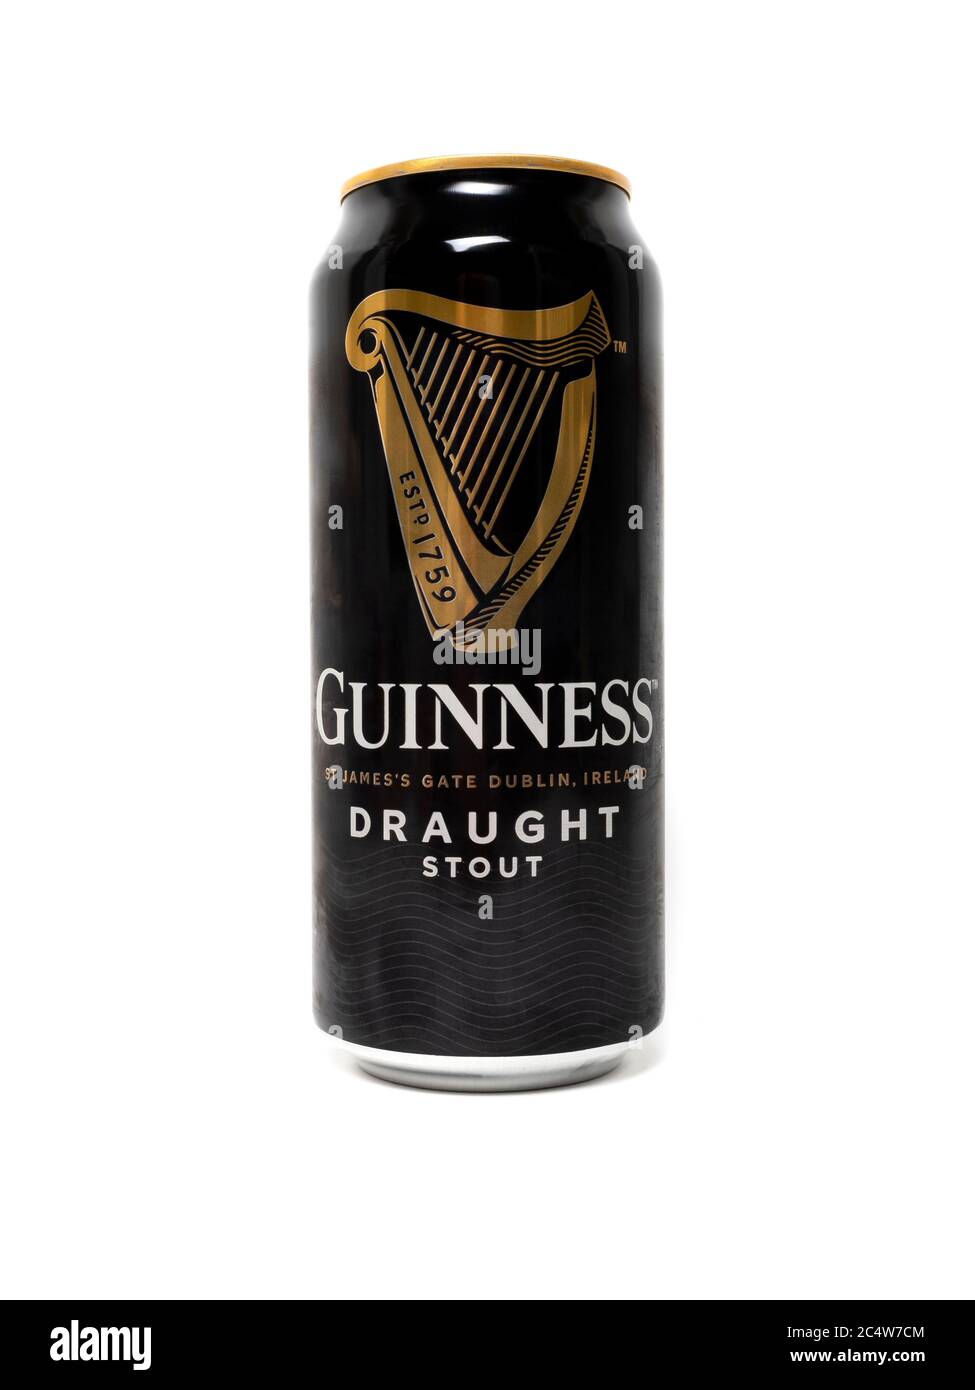 Sankt-Petersburg, Russia- October 04, 2019: Guinness draught can on white background Stock Photo